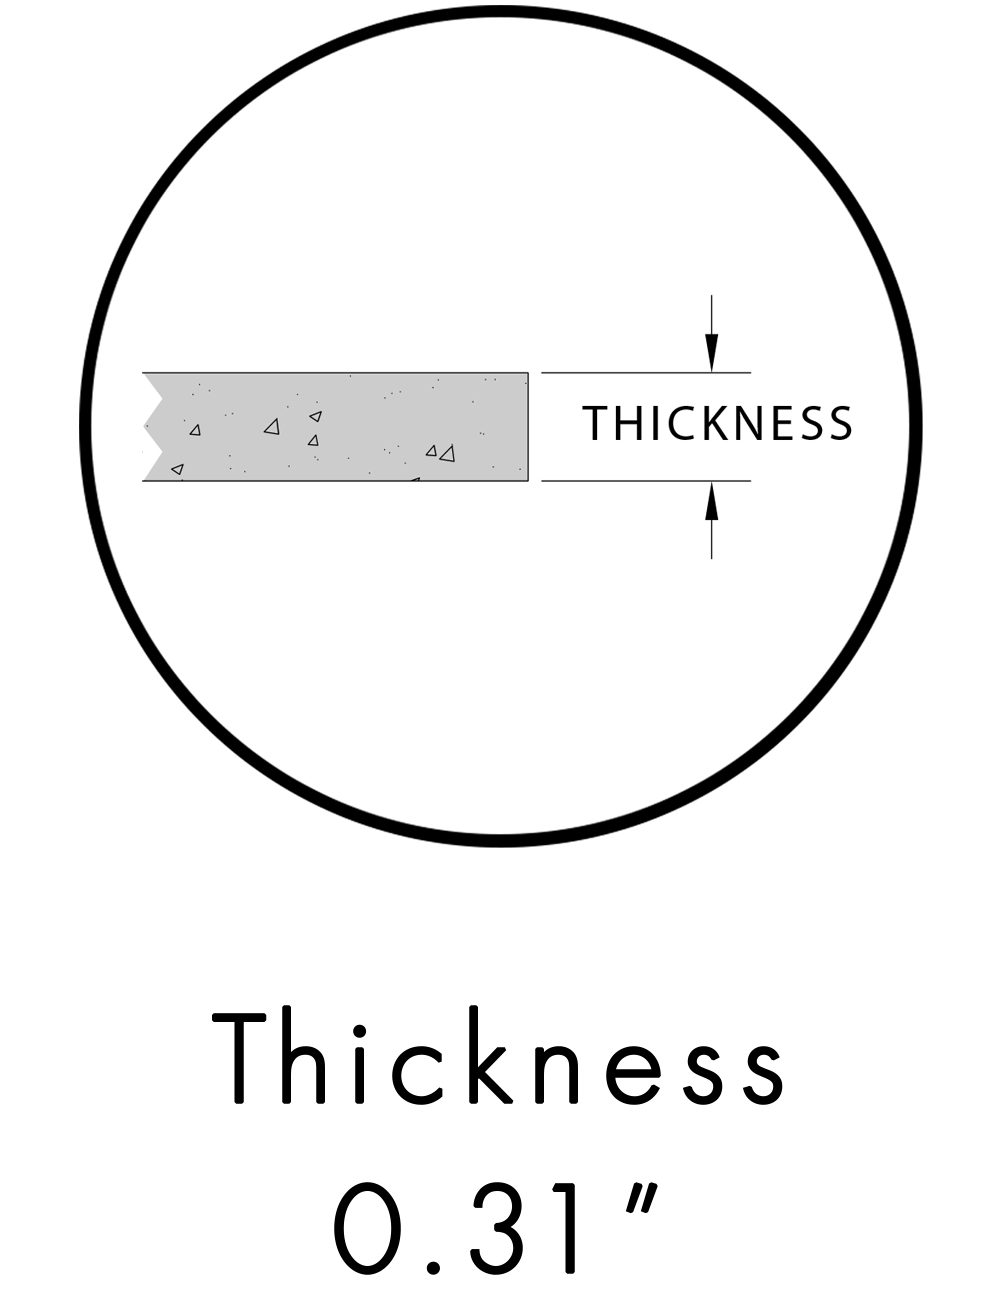 Chevron_Thickness.png